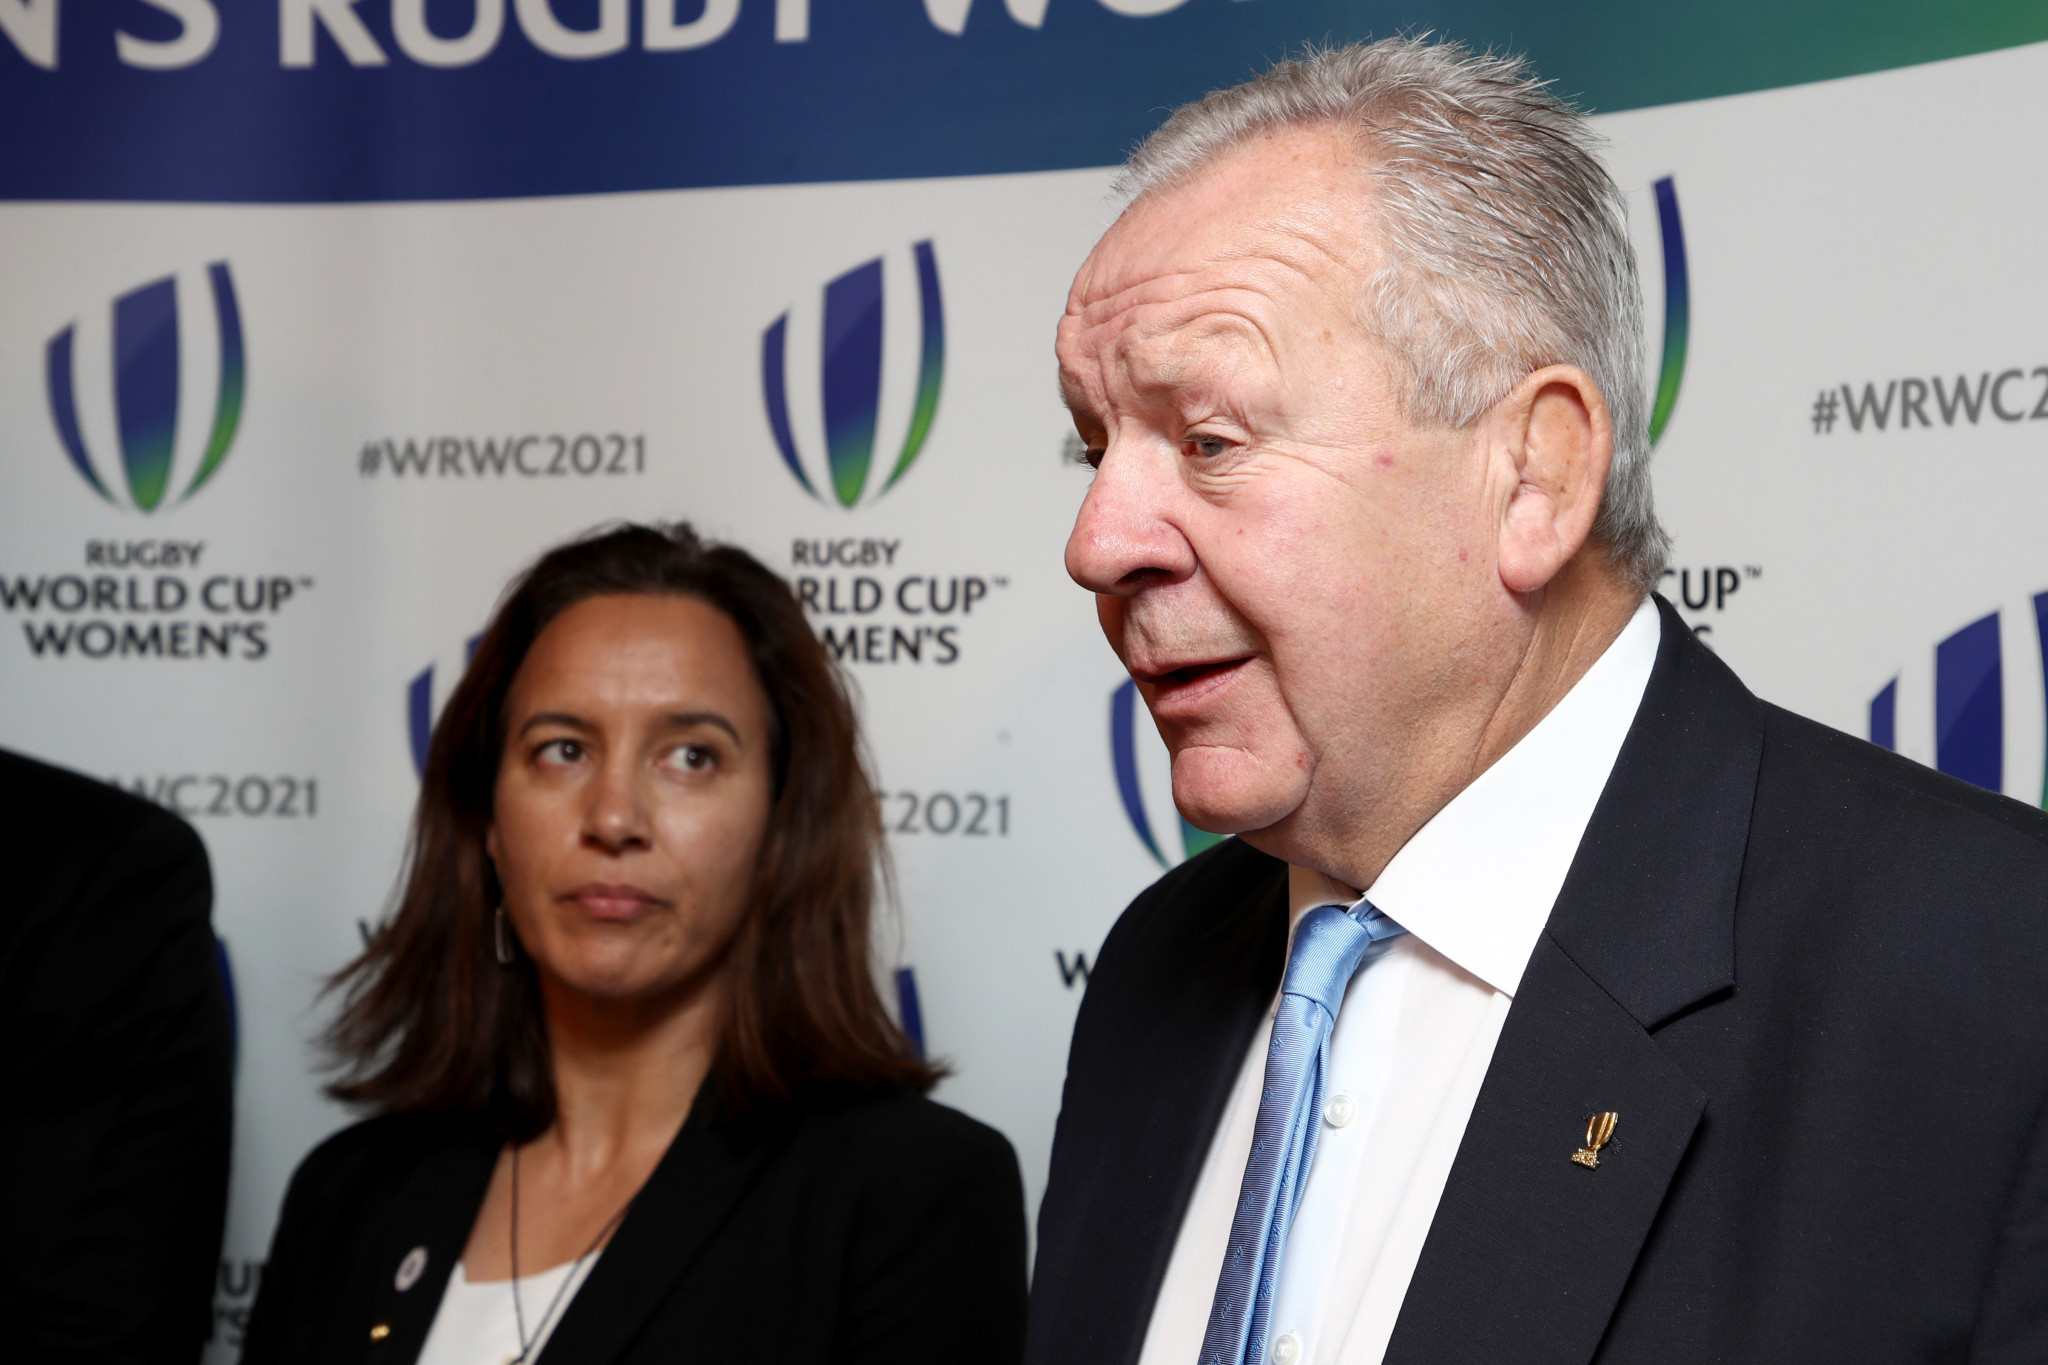 World Rugby chairman Sir Bill Beaumont congratulated the recipients of the scholarships ©Getty Images